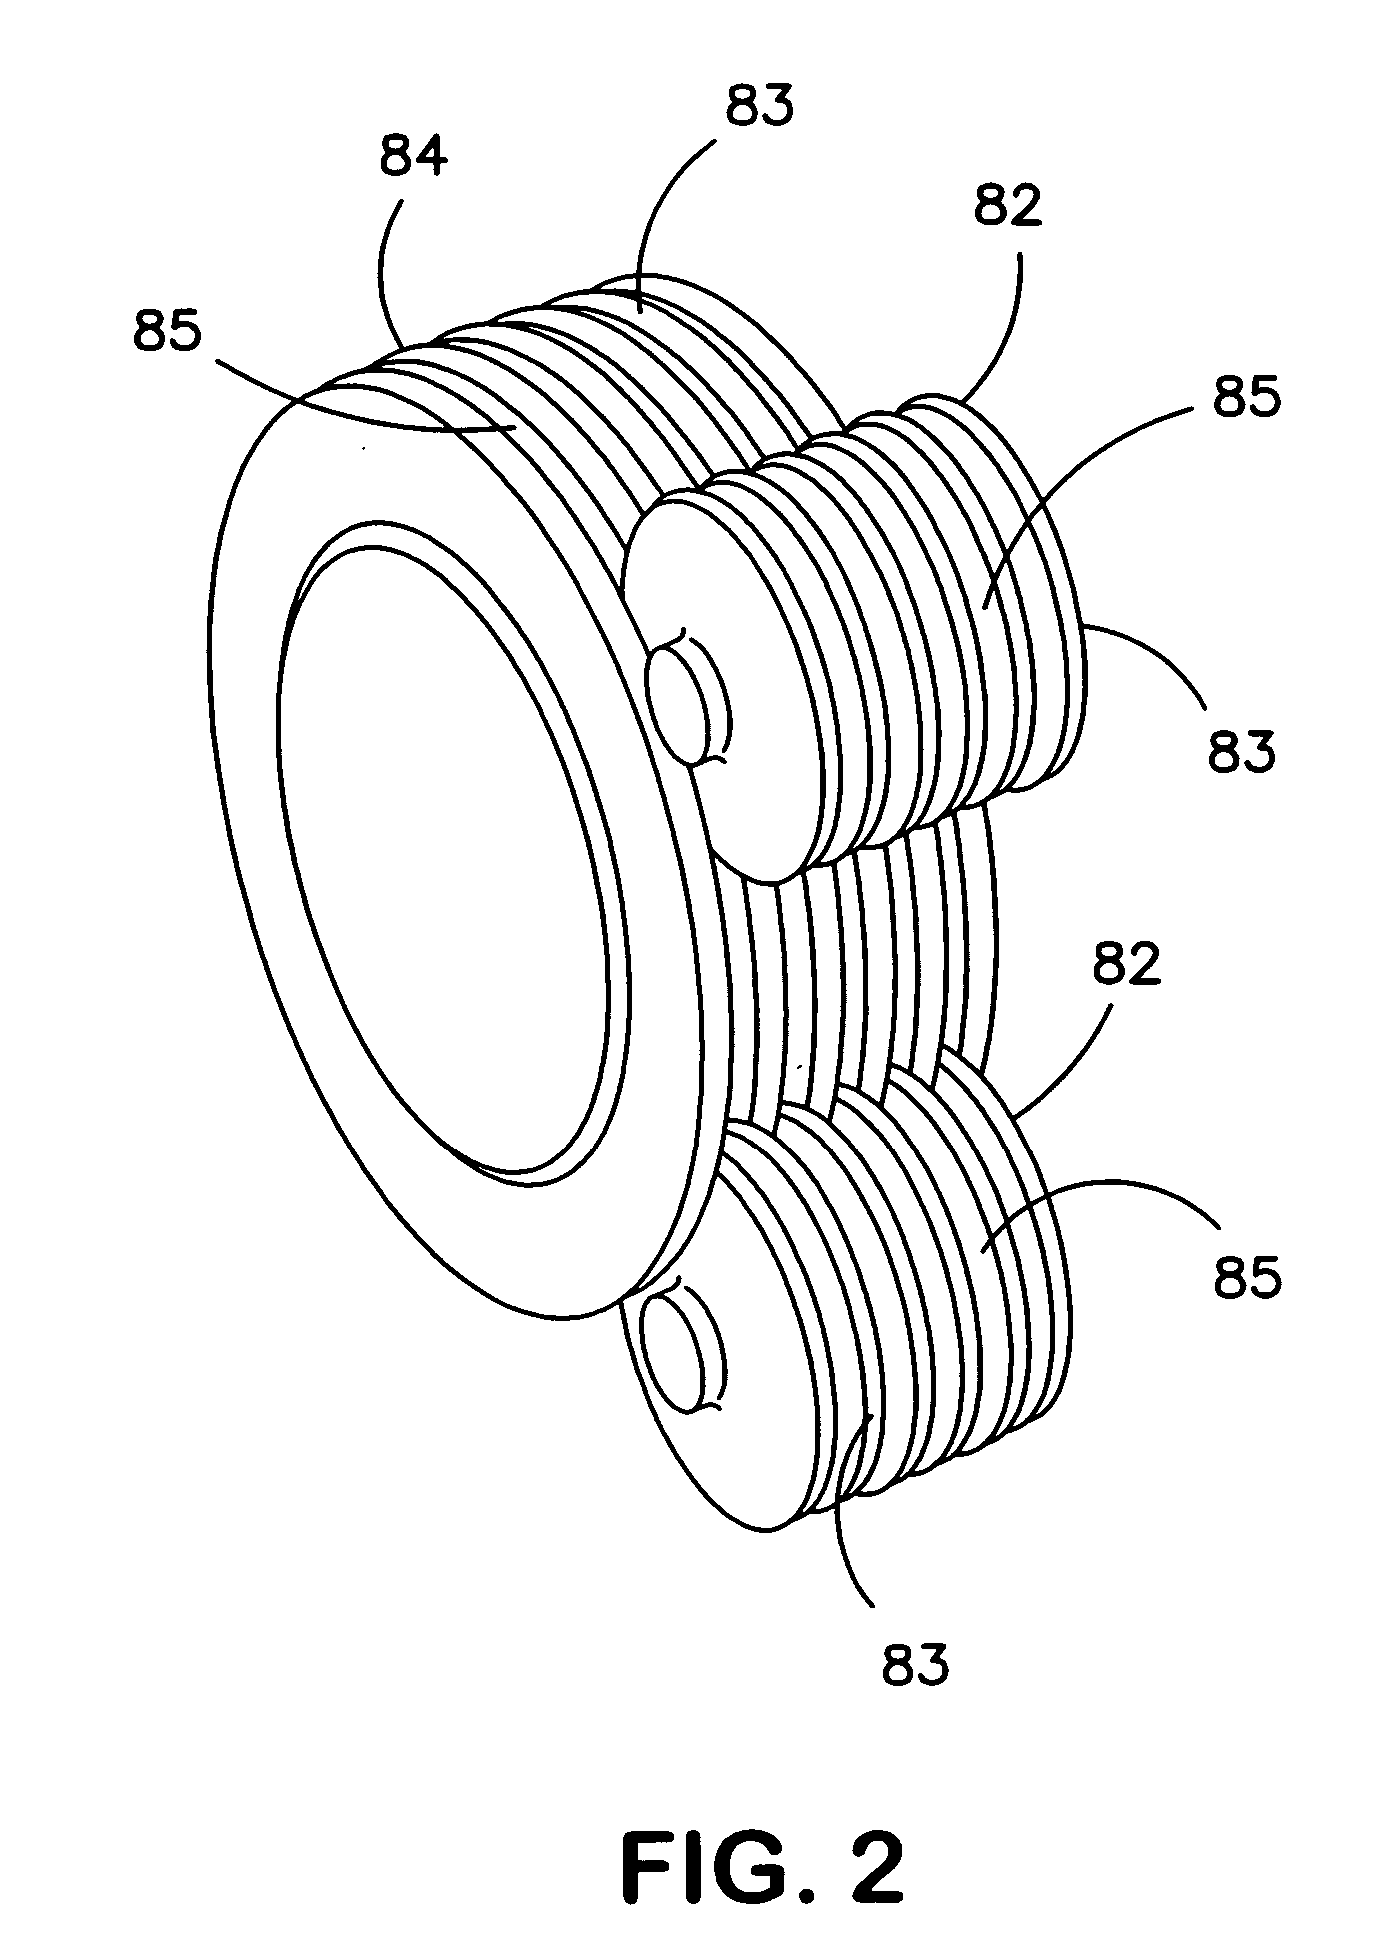 Method for forming an elastic laminate